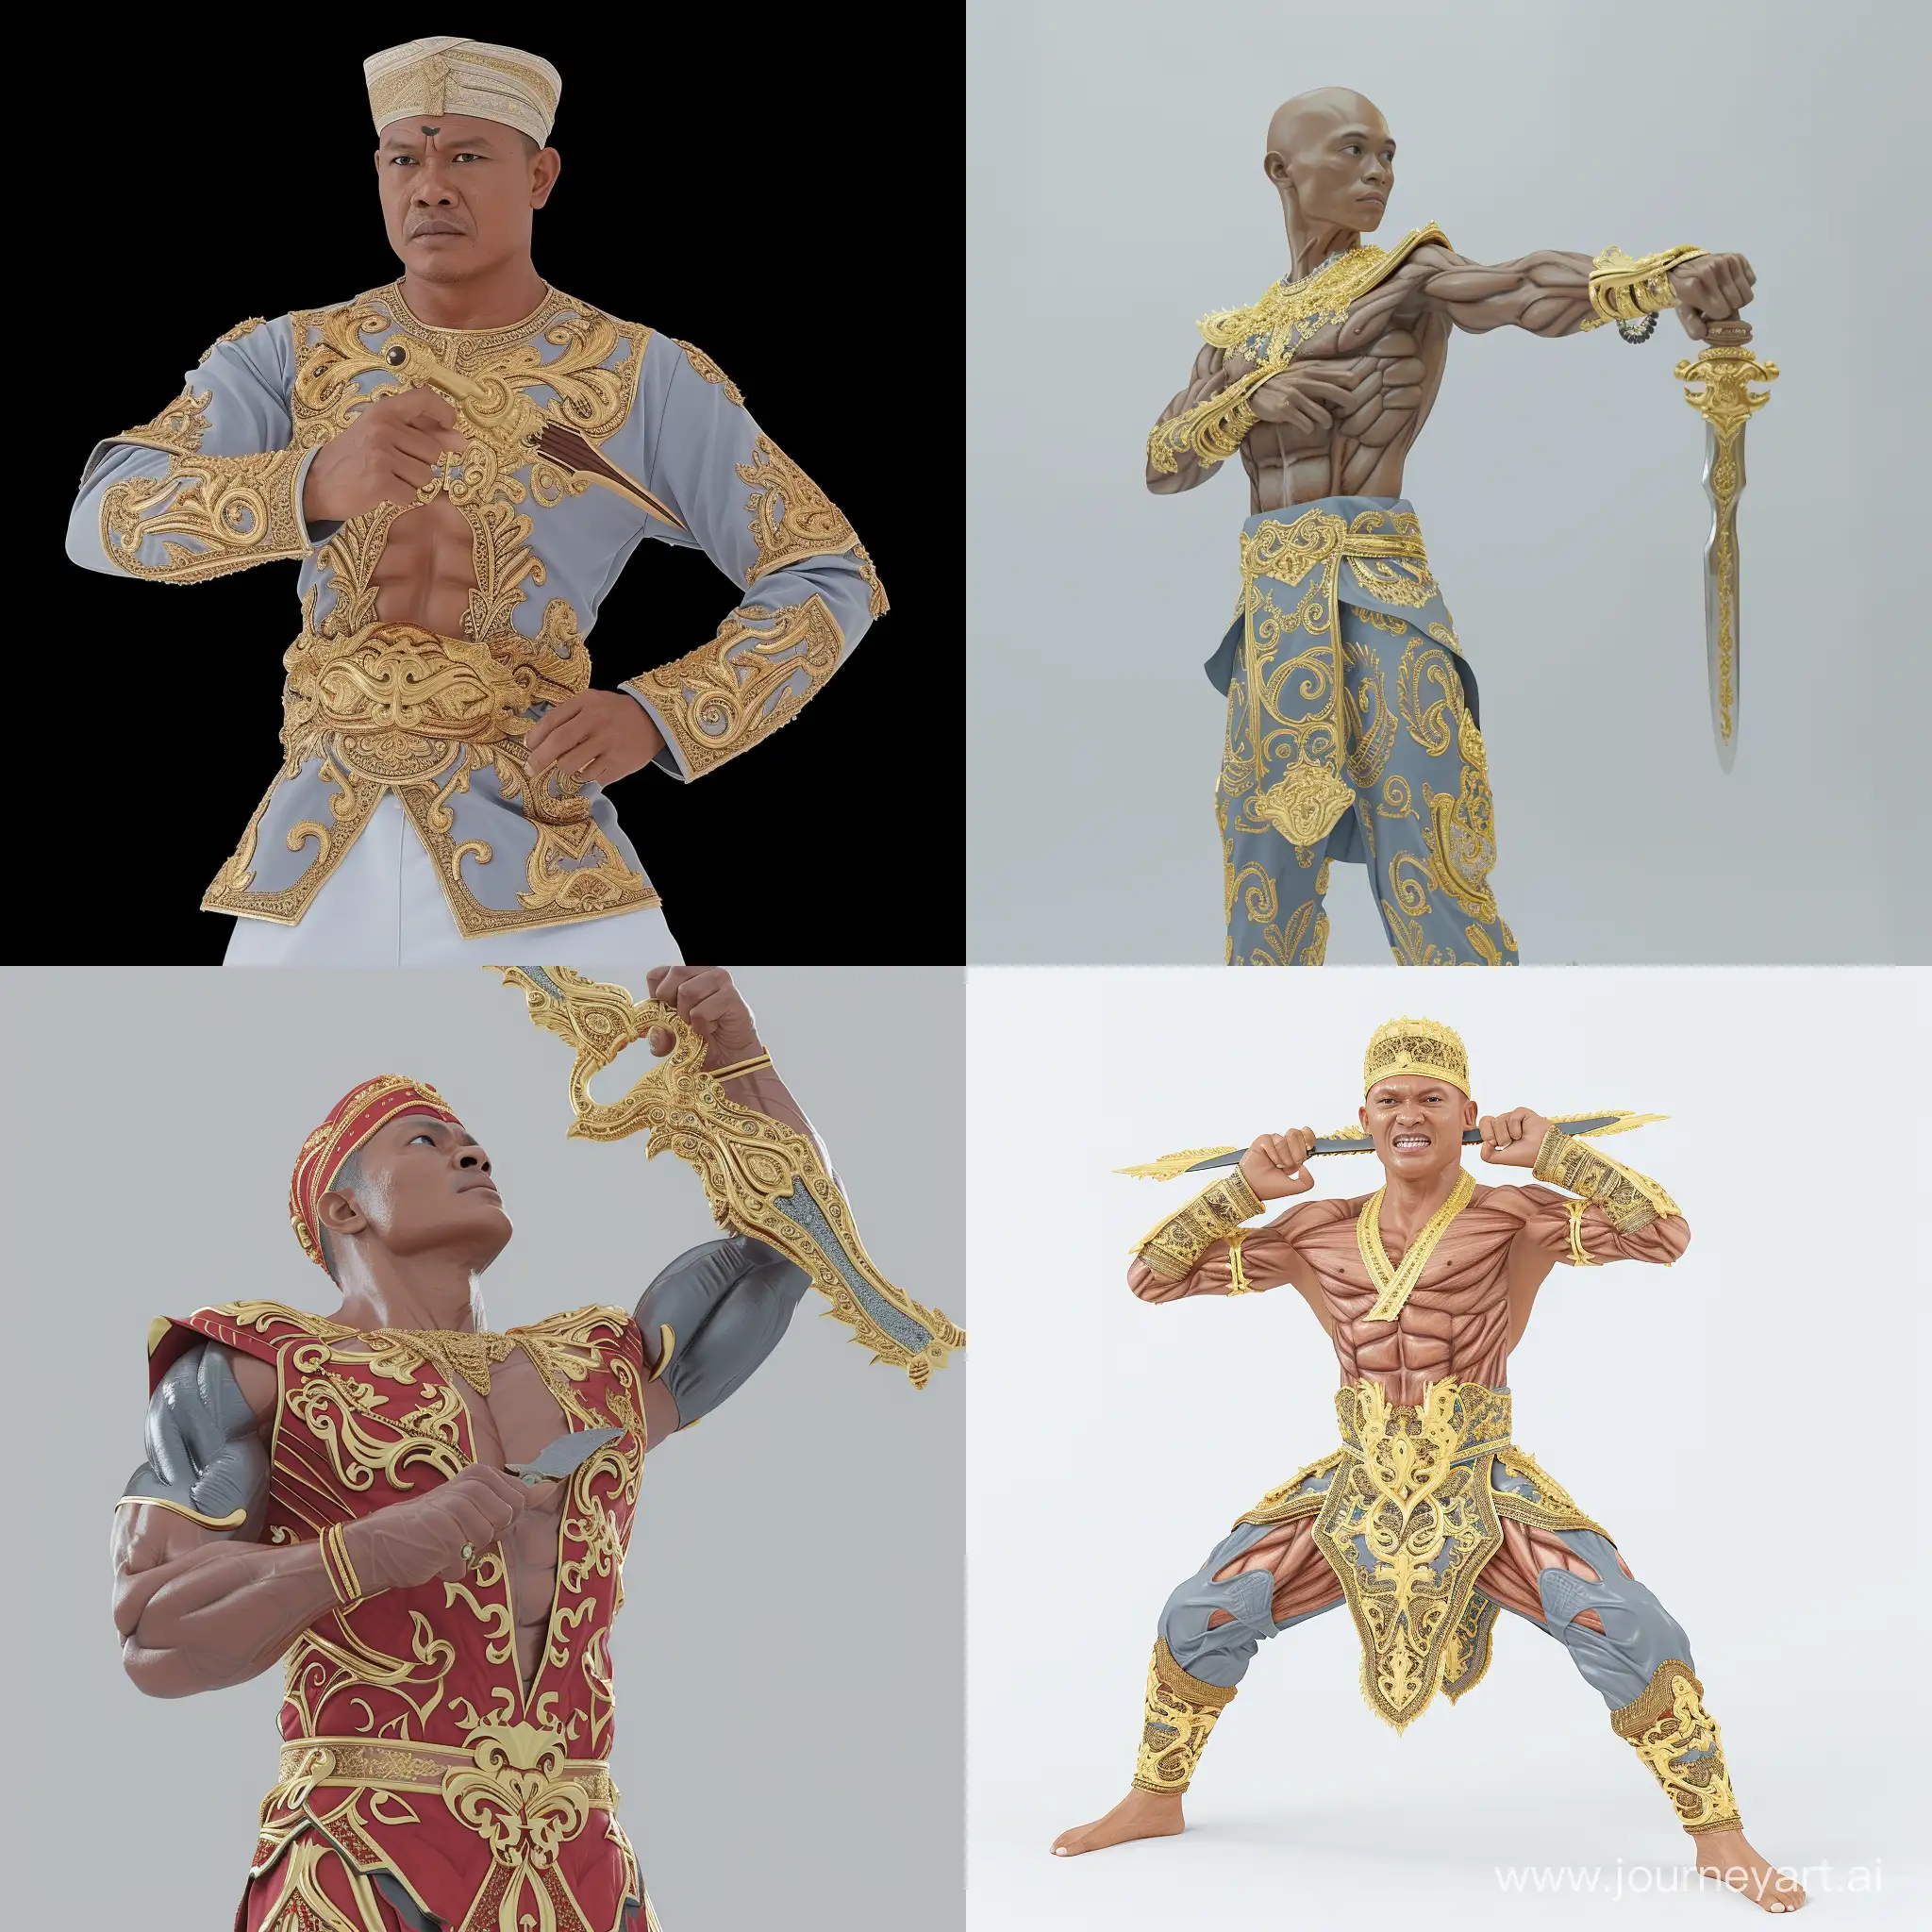 Powerful-Malay-Warrior-in-Traditional-Attire-with-Exaggerated-Muscles-and-Keris-Weapon